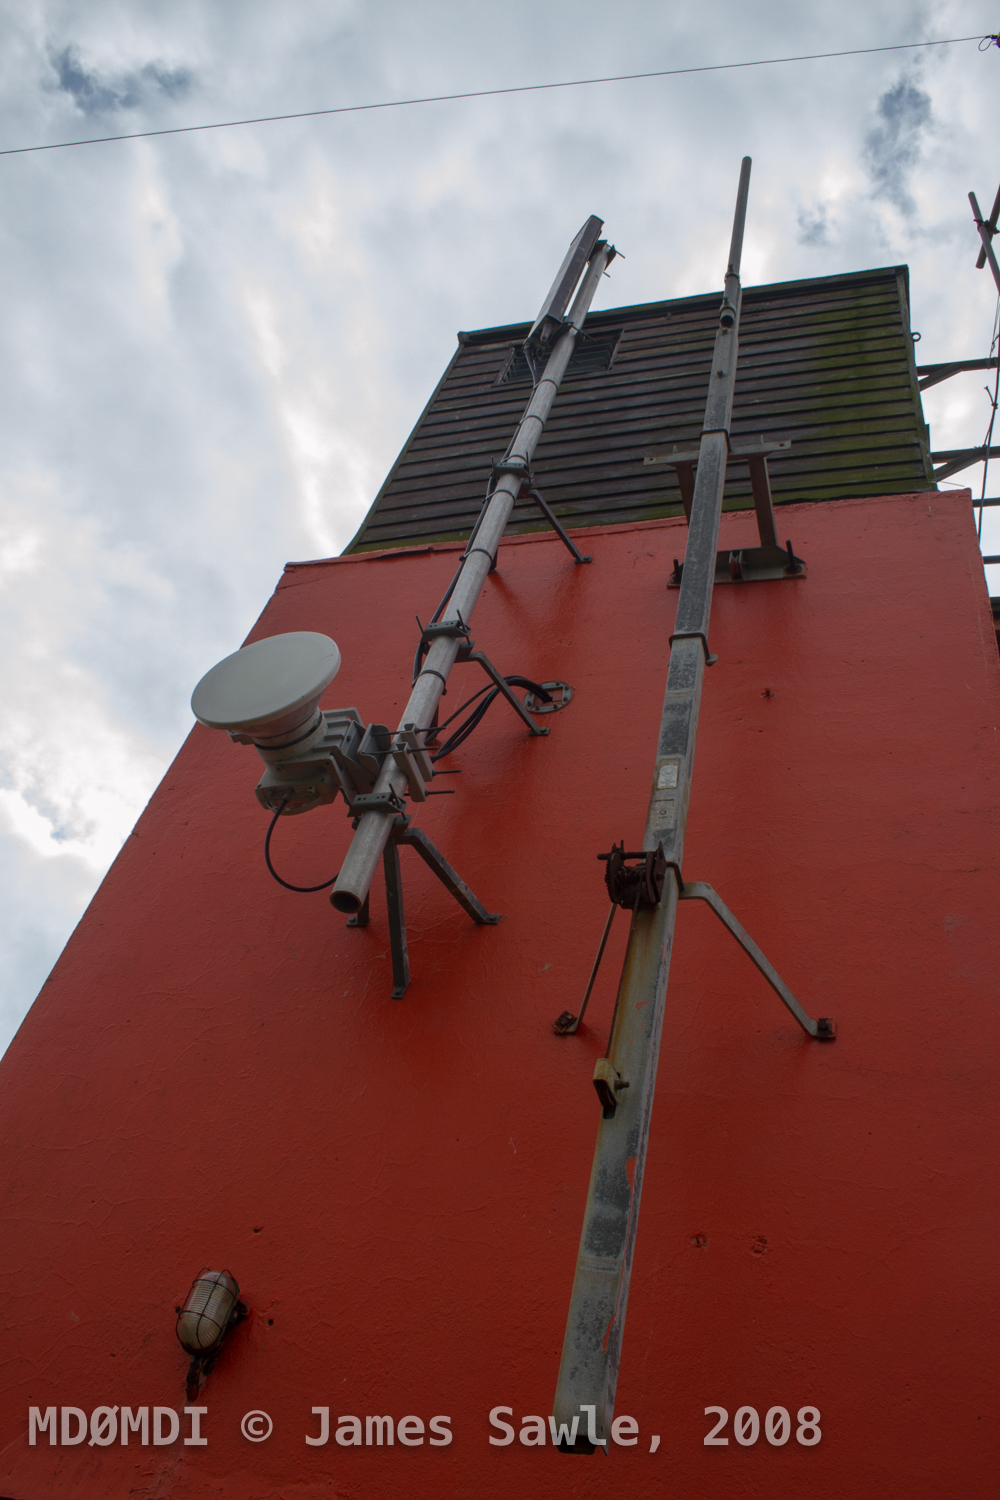 A View of the 4G Masts that have been installed to the back of the Scarlett Point Tower.